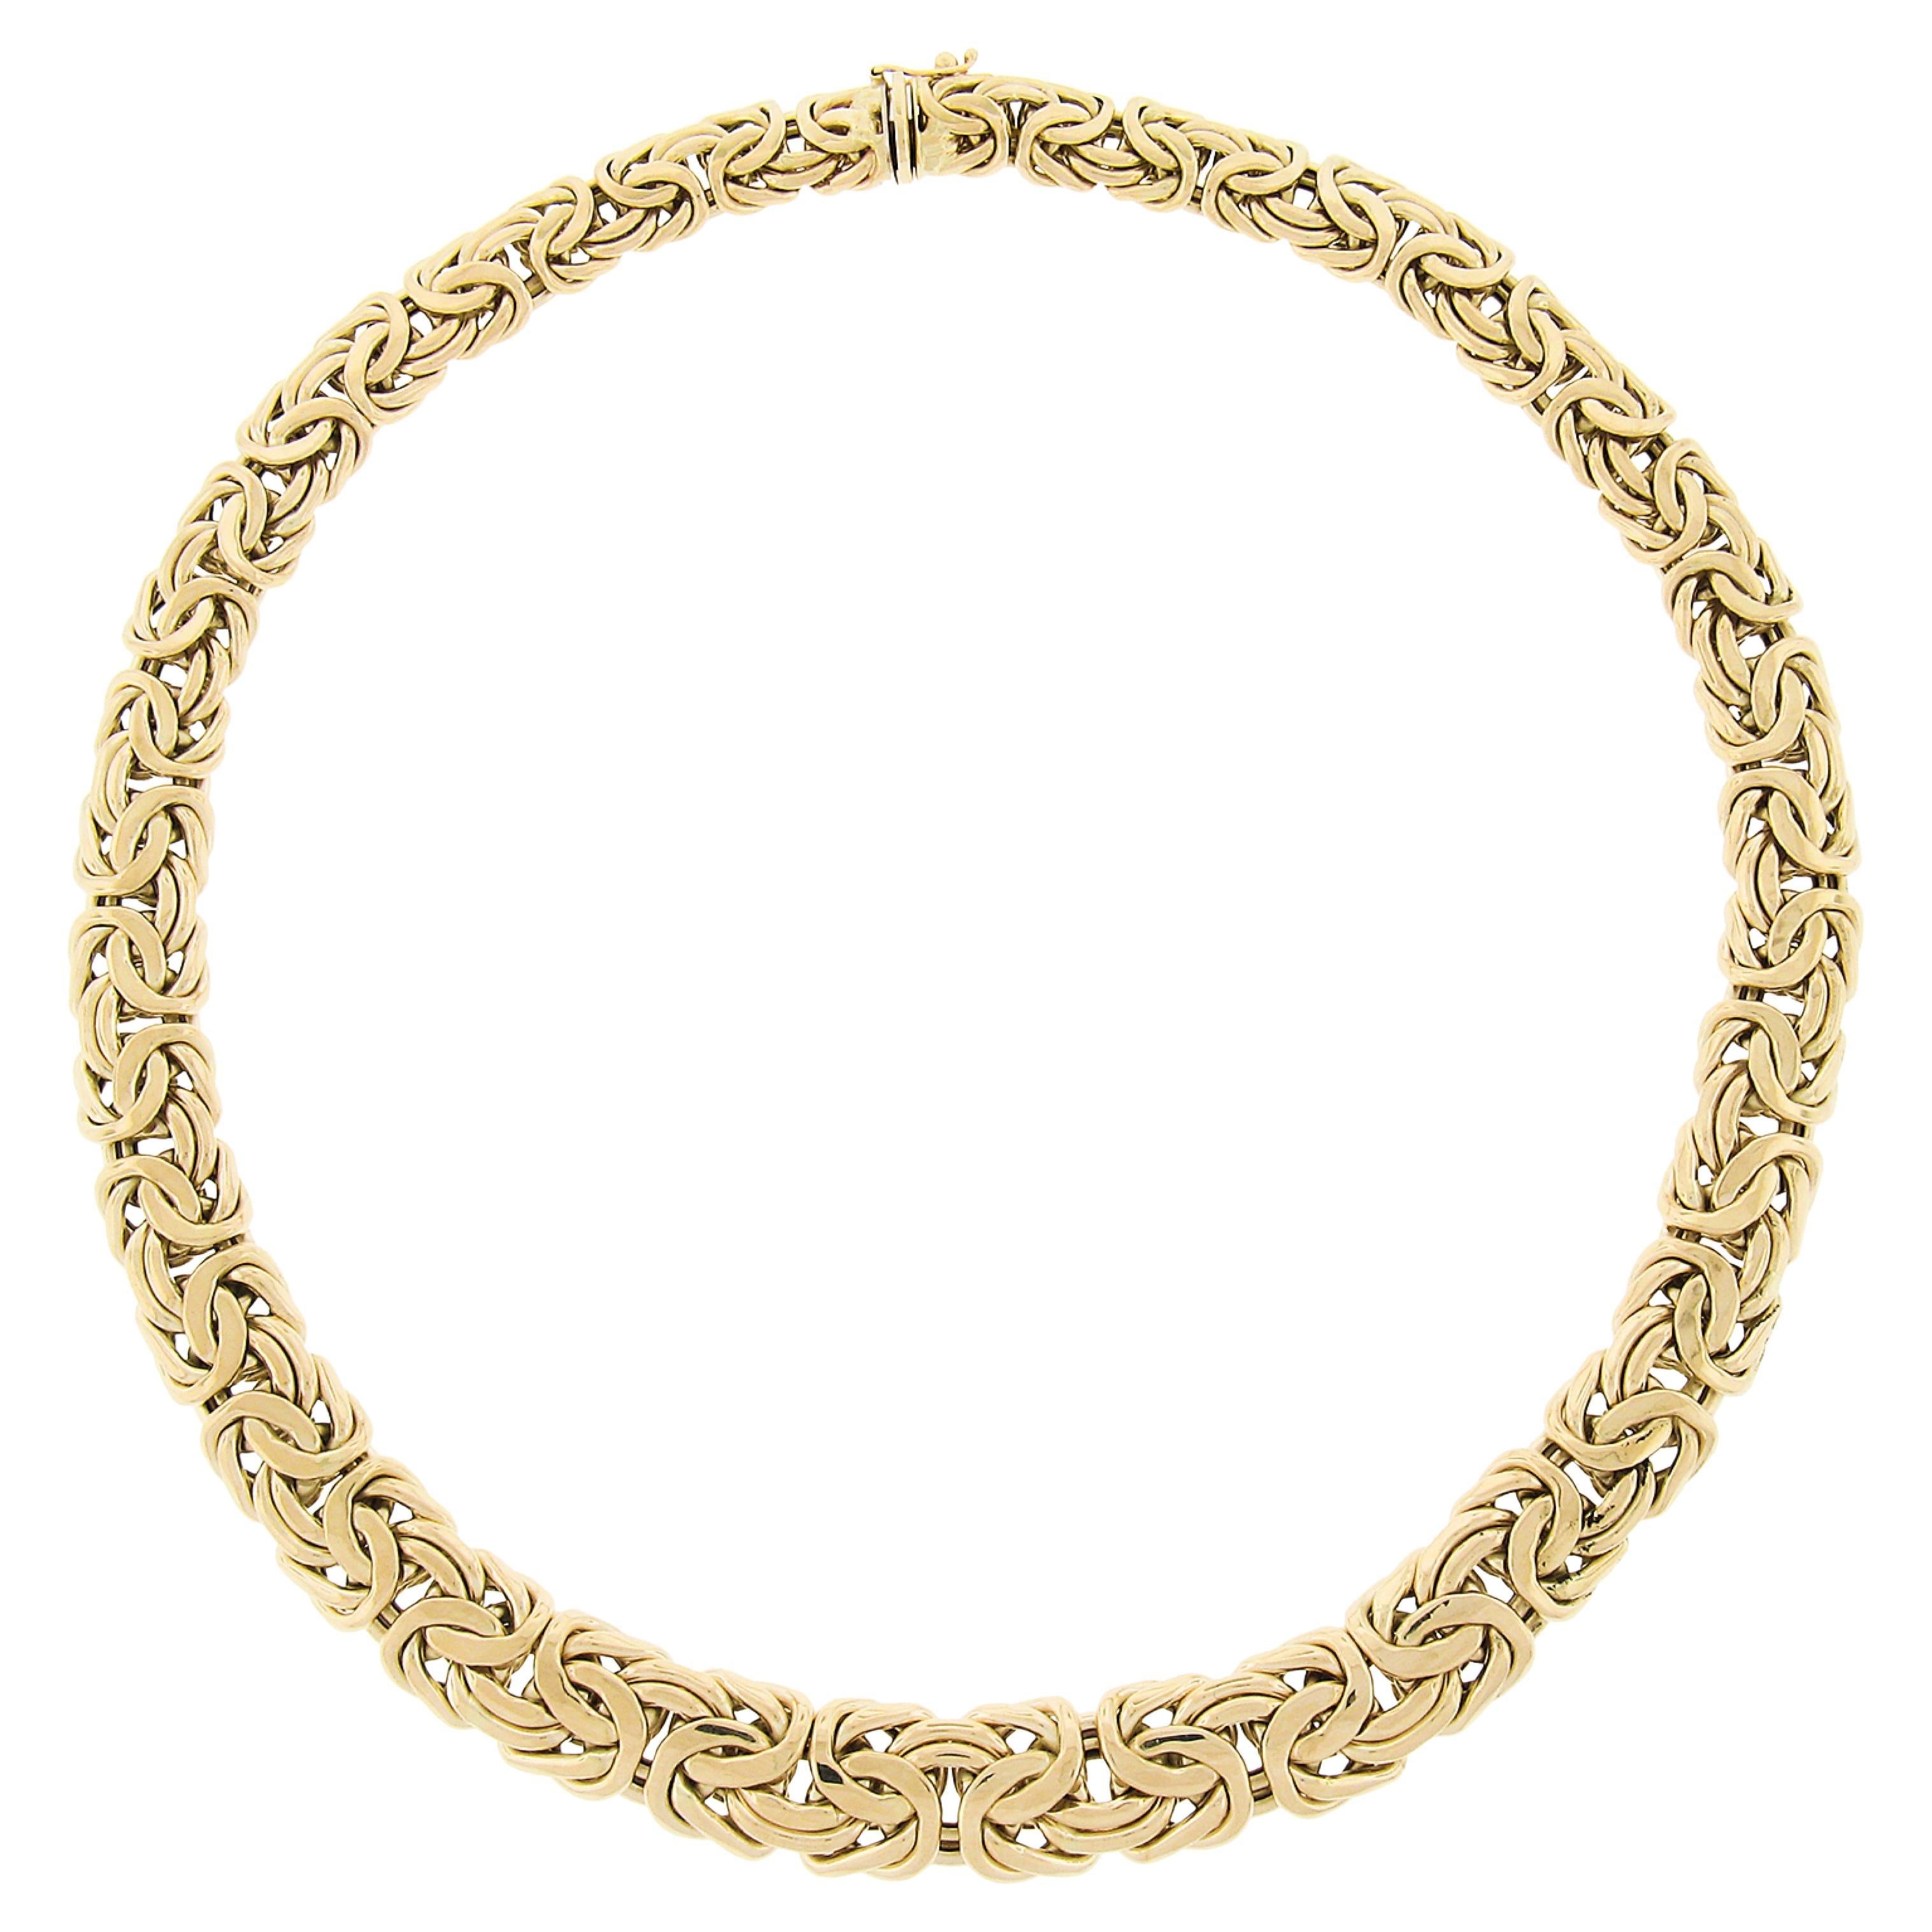 14k Gold Graduated Flat & Domed Byzantine Link Chain Necklace w/ Push Clasp For Sale